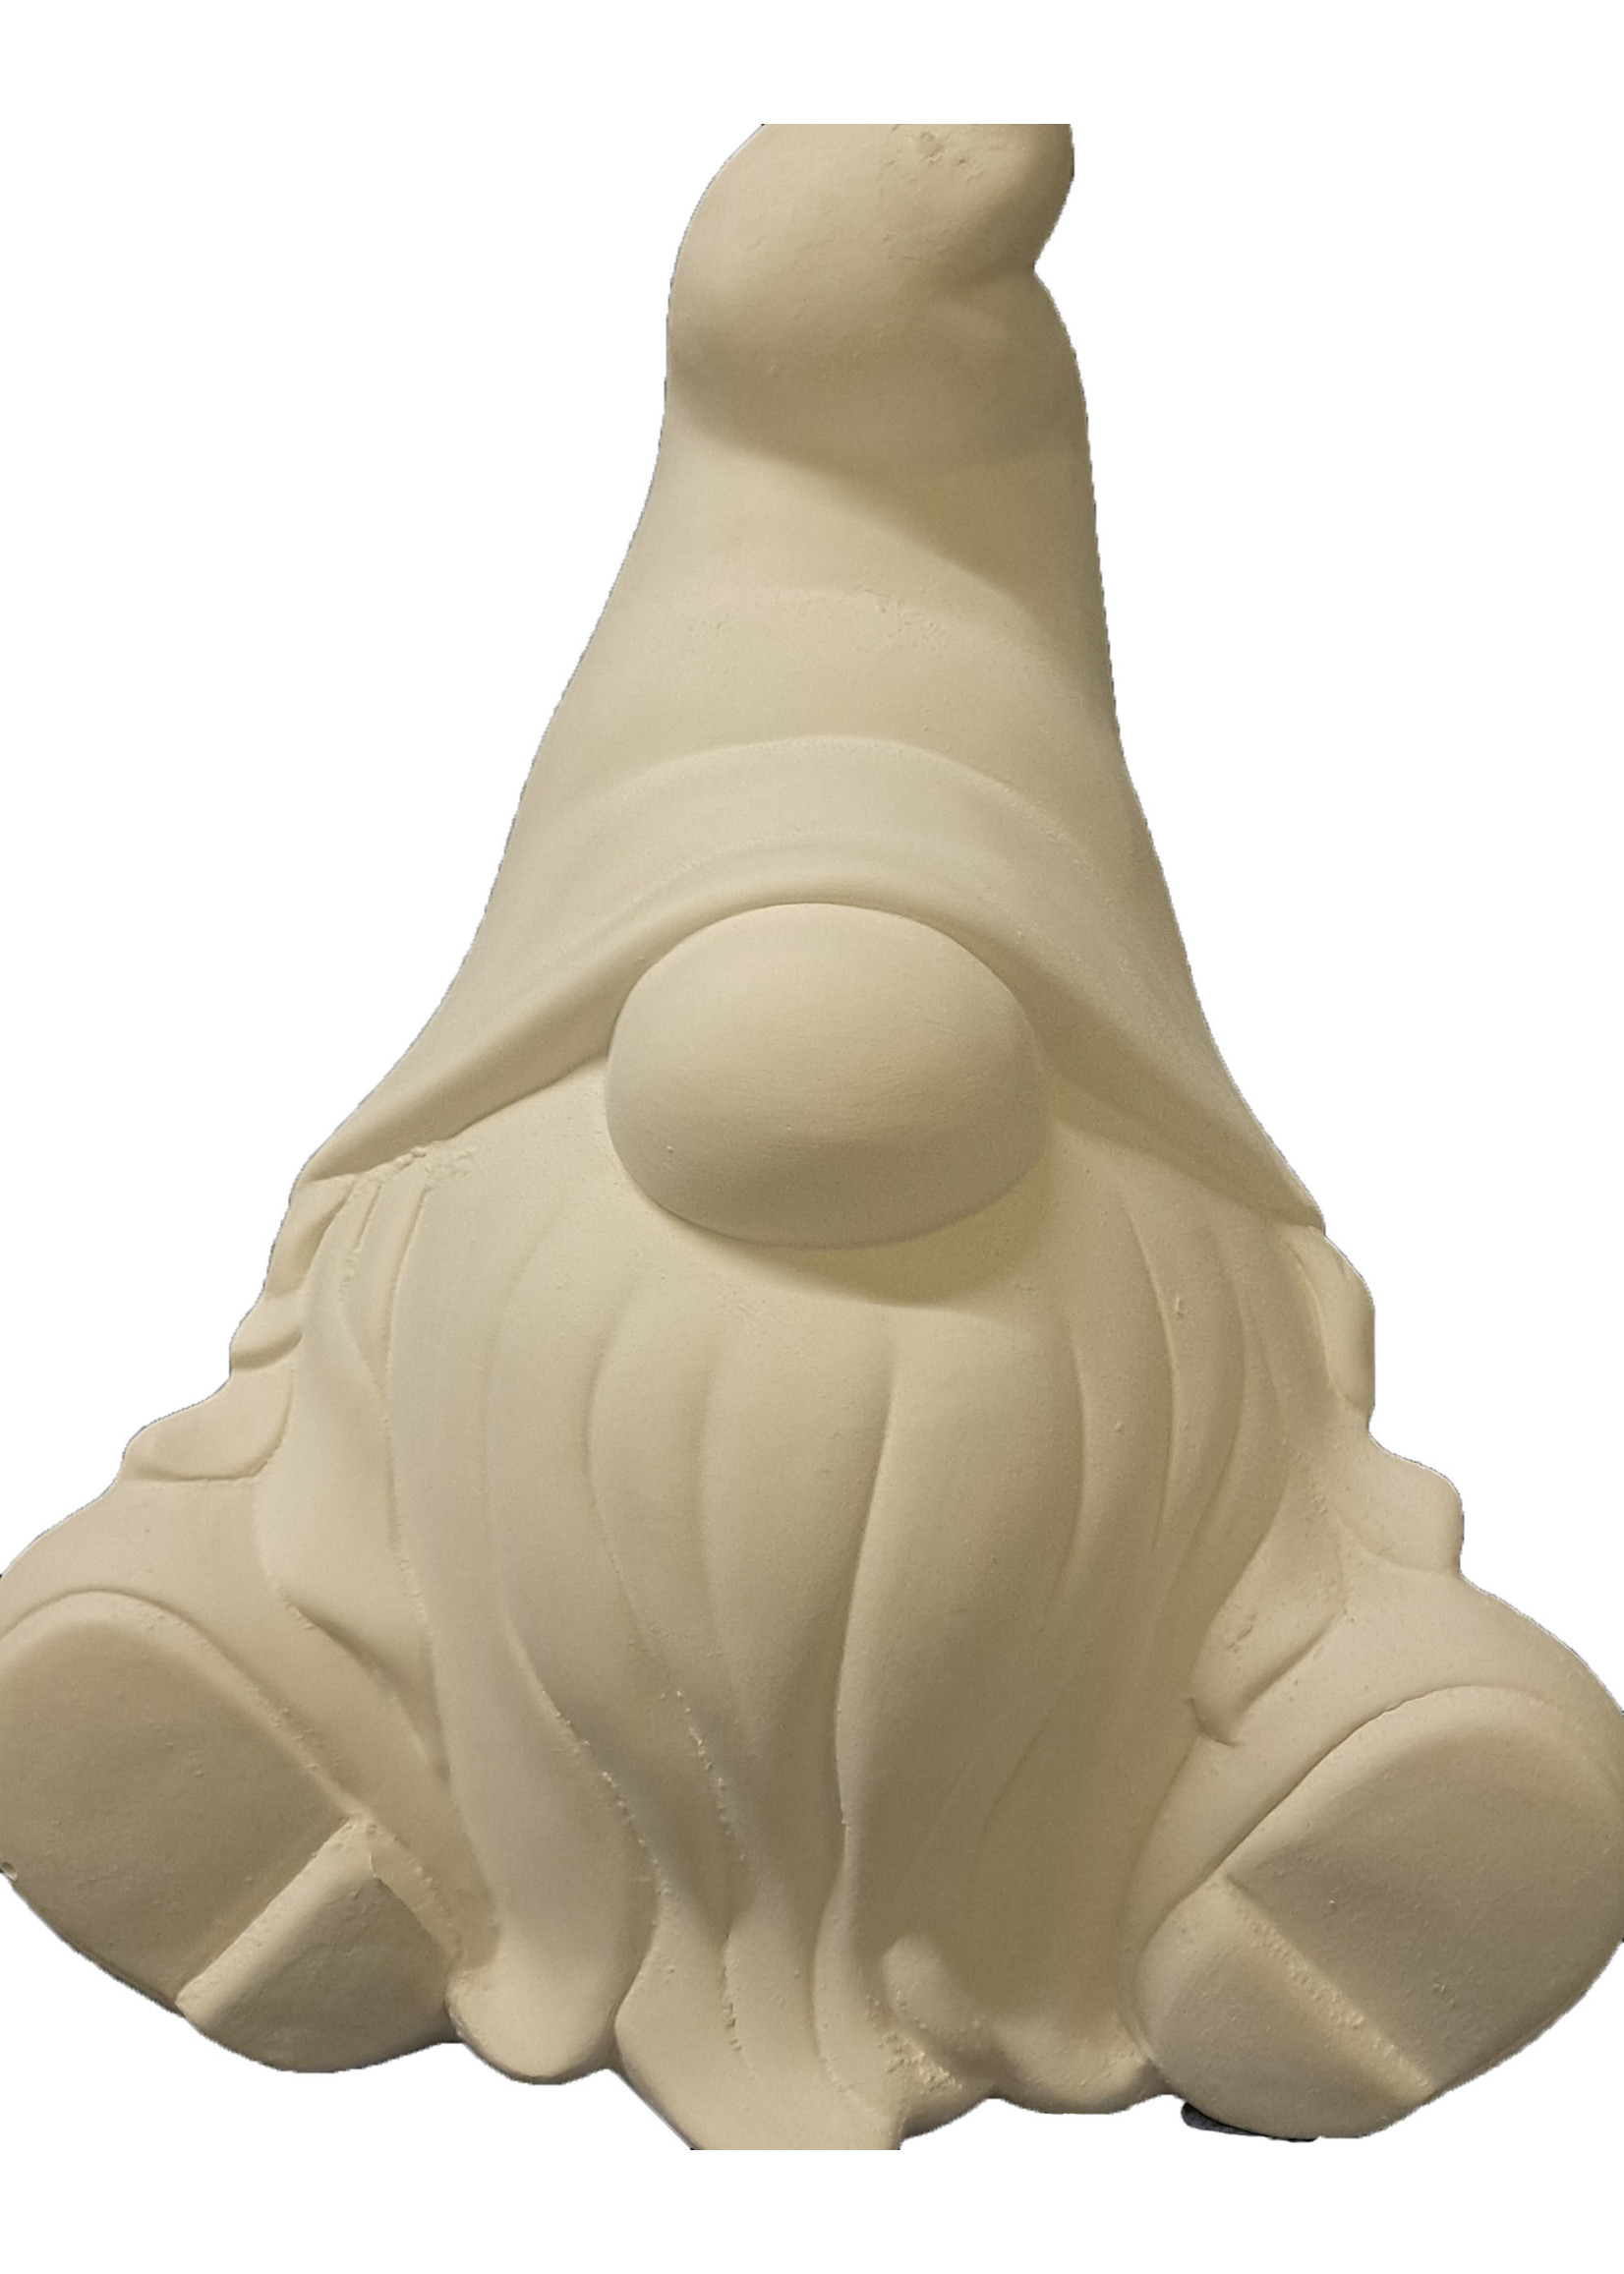 Creative Kreations Ceramics and Gifts Hagar Gnome 12.5”Tx9.75”Wx7.75"D Ready to paint, Ceramic Bisque